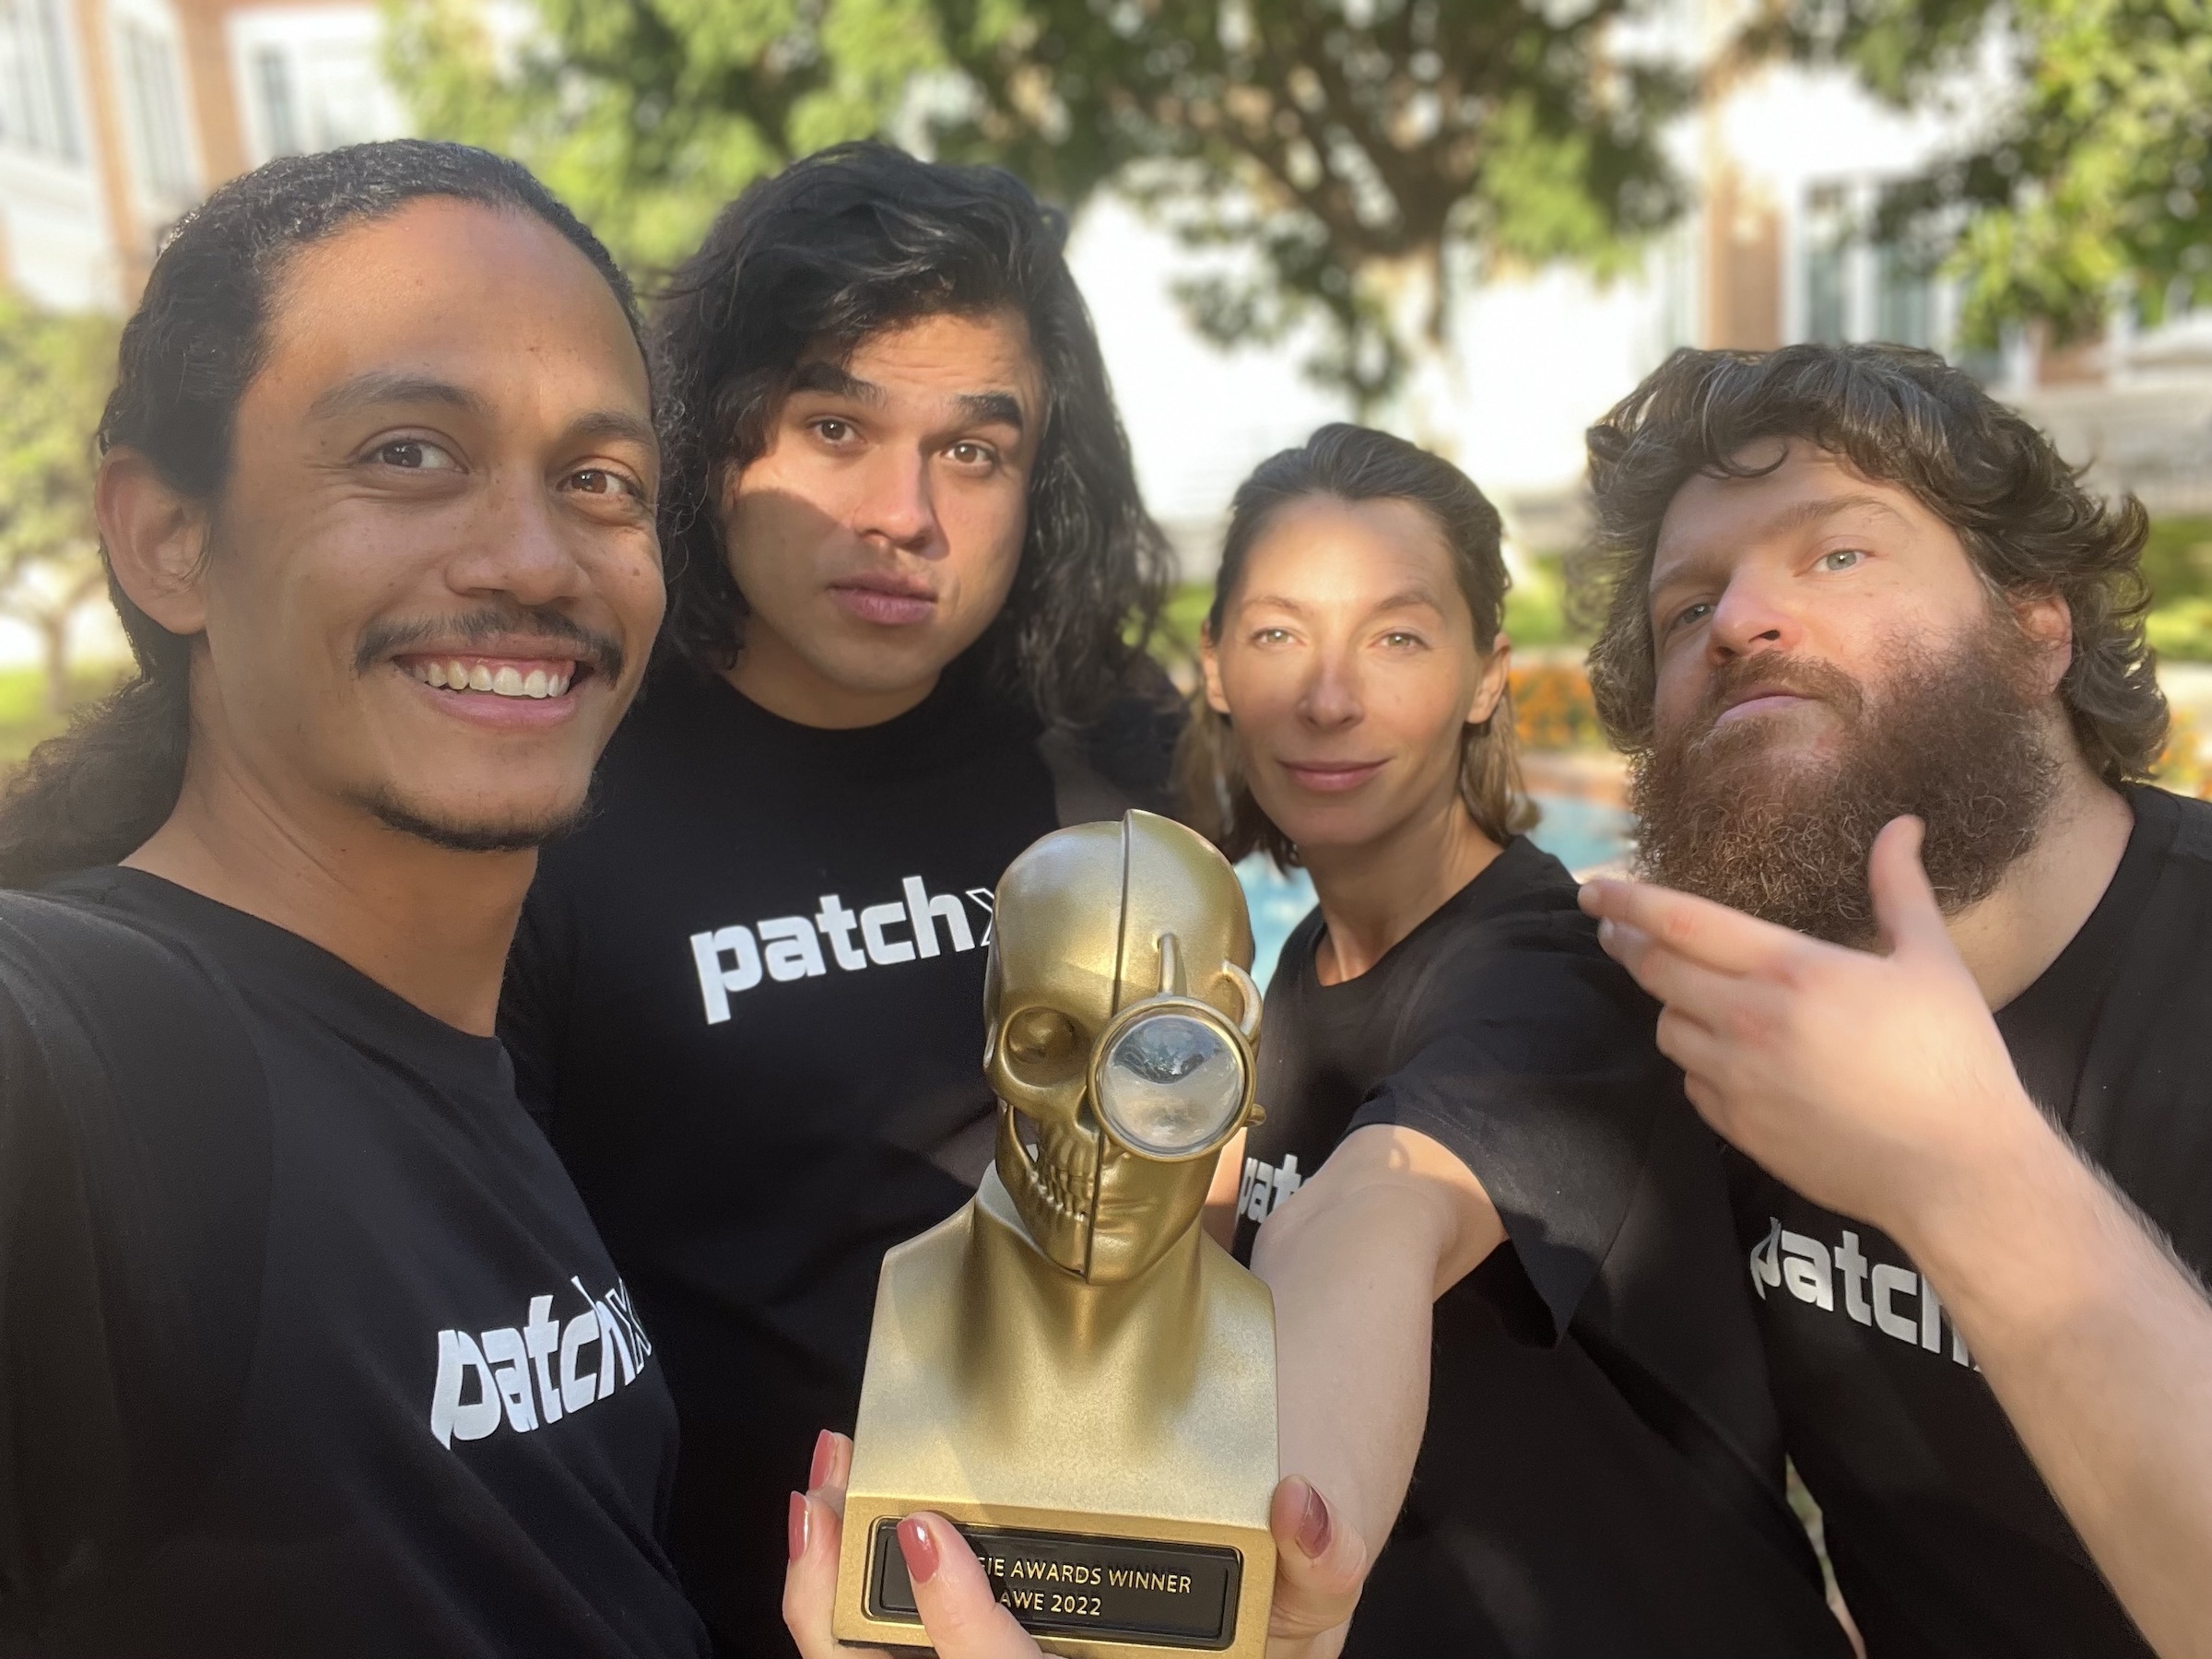 We won an Auggie! PatchXR named "Startup to Watch"